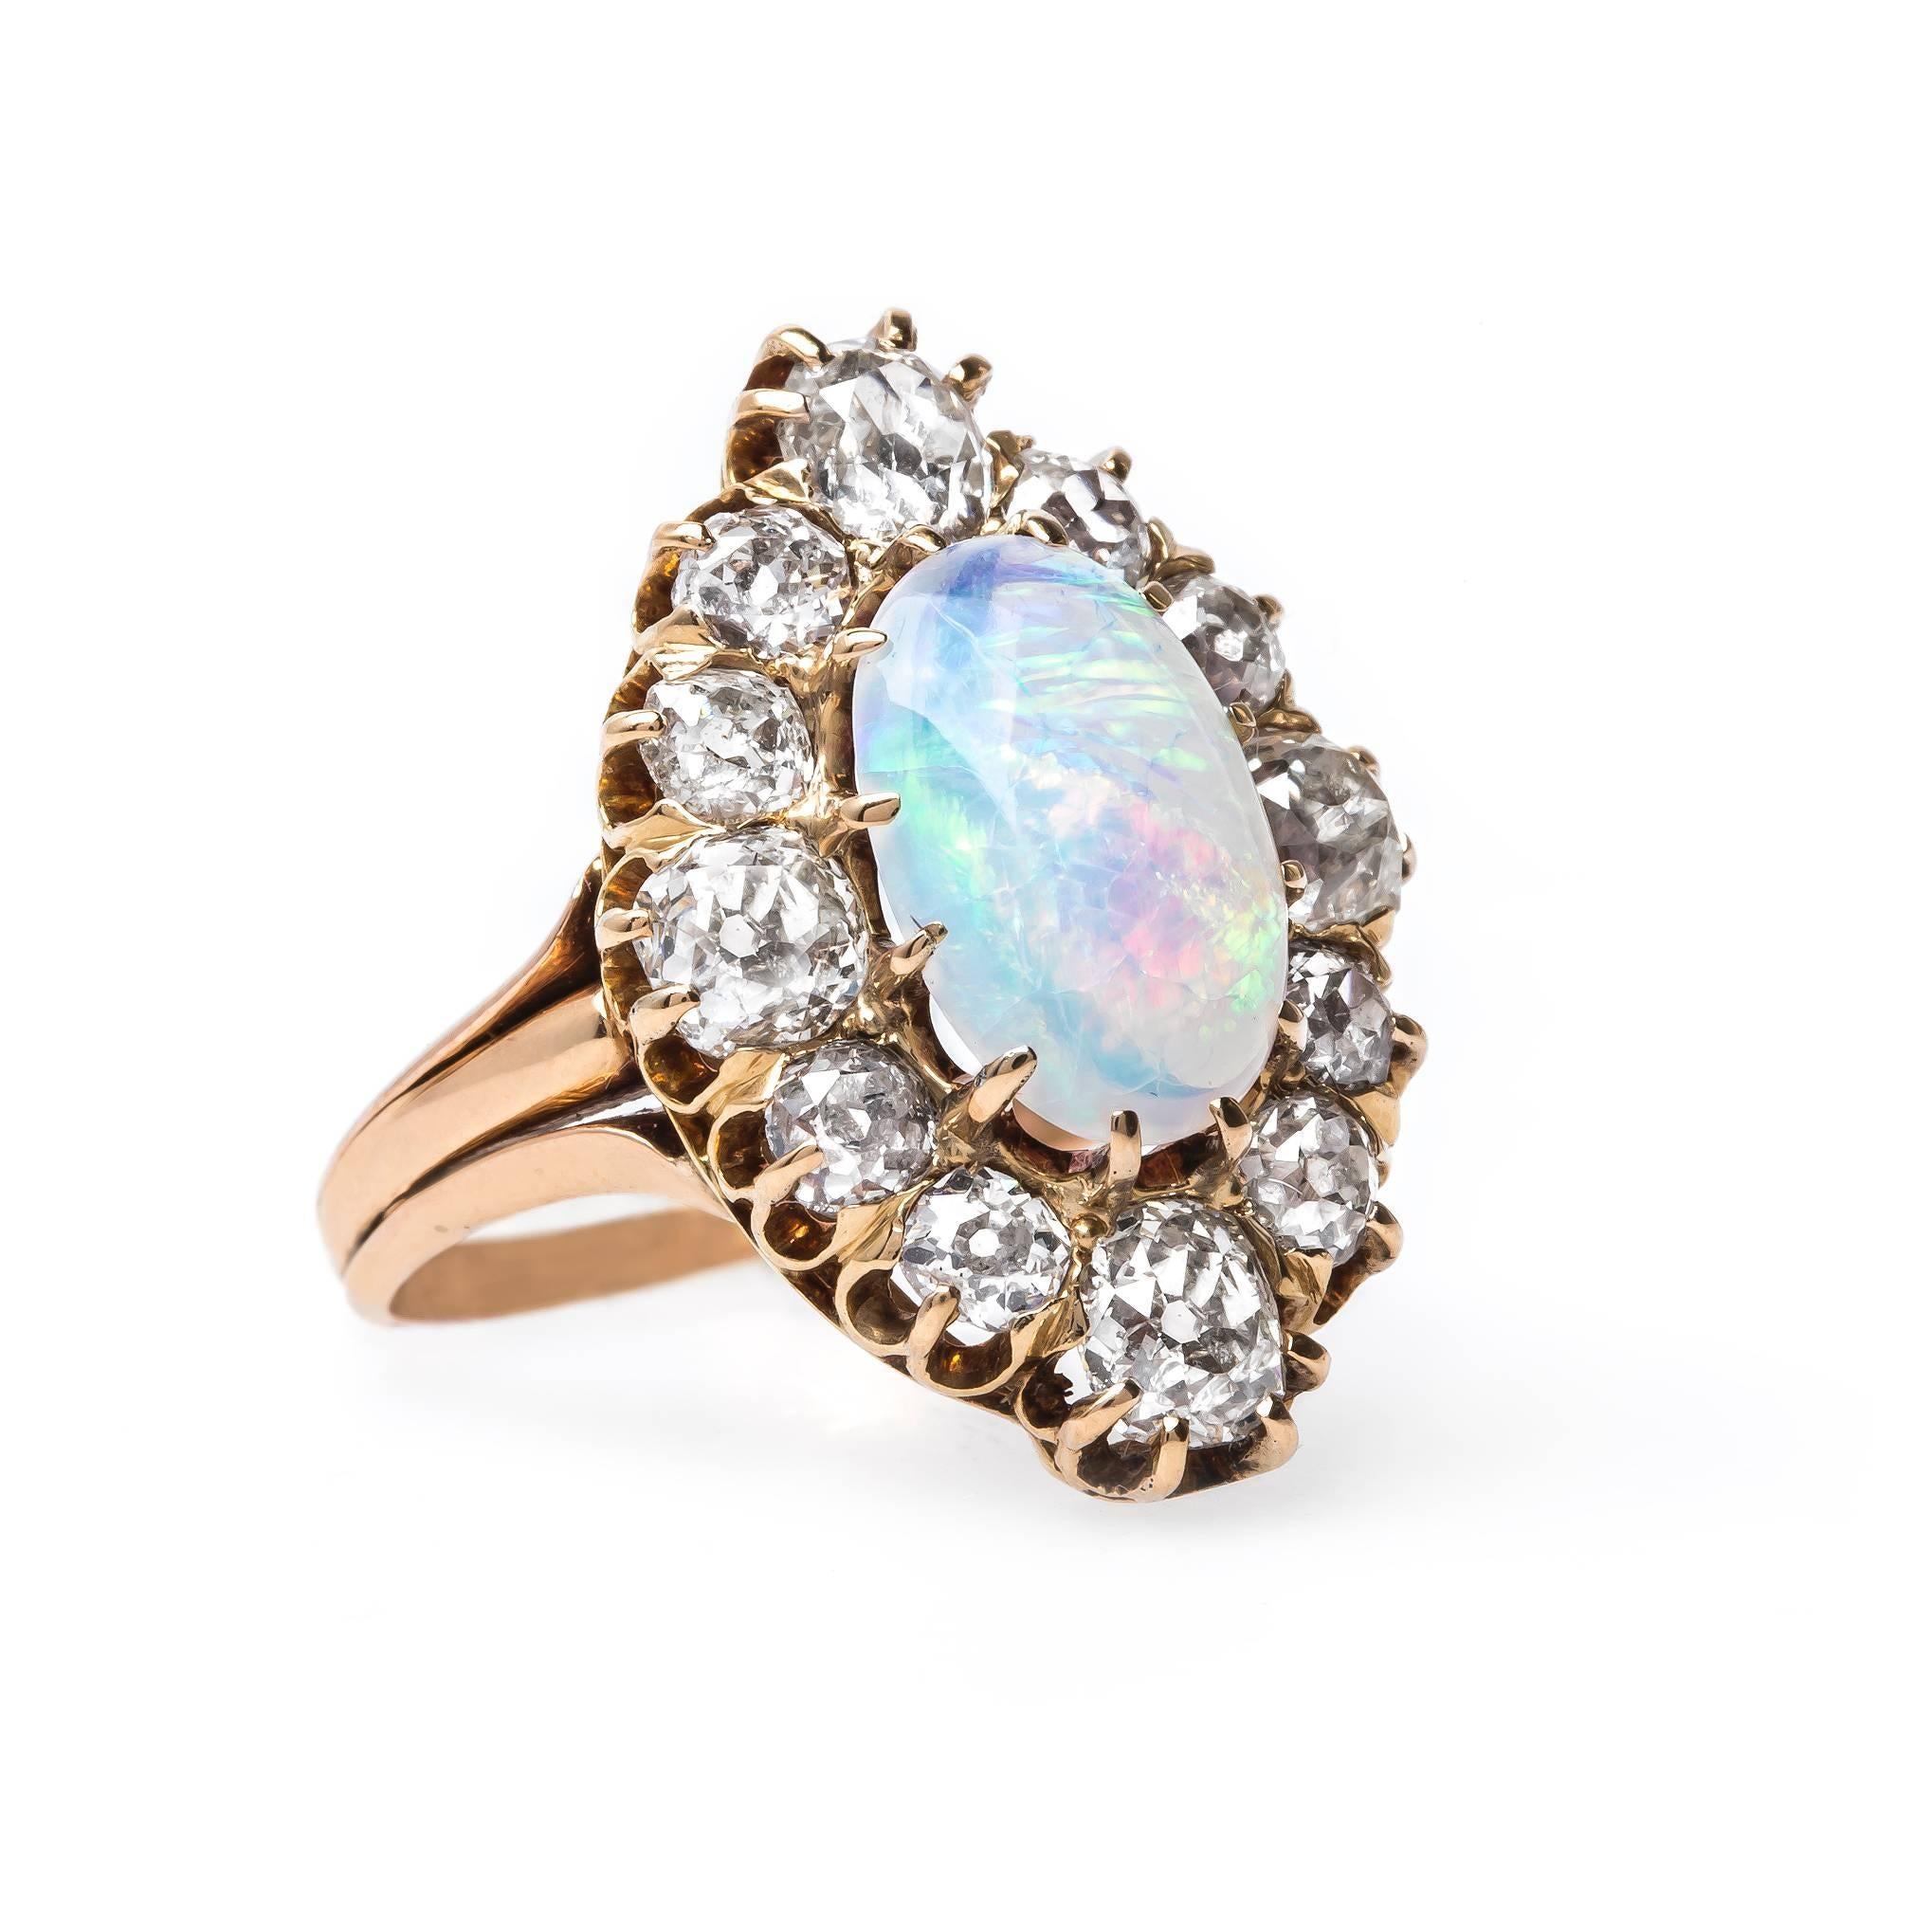 Archcliffe is an incredibly unique and authentic Victorian era (circa 1890) 14k yellow gold and 18k rose gold cocktail ring. This bold vintage right hand ring centers a prong-set Oval Cabochon Australian opal gauged at 11.7mm x 7.5mm and displaying